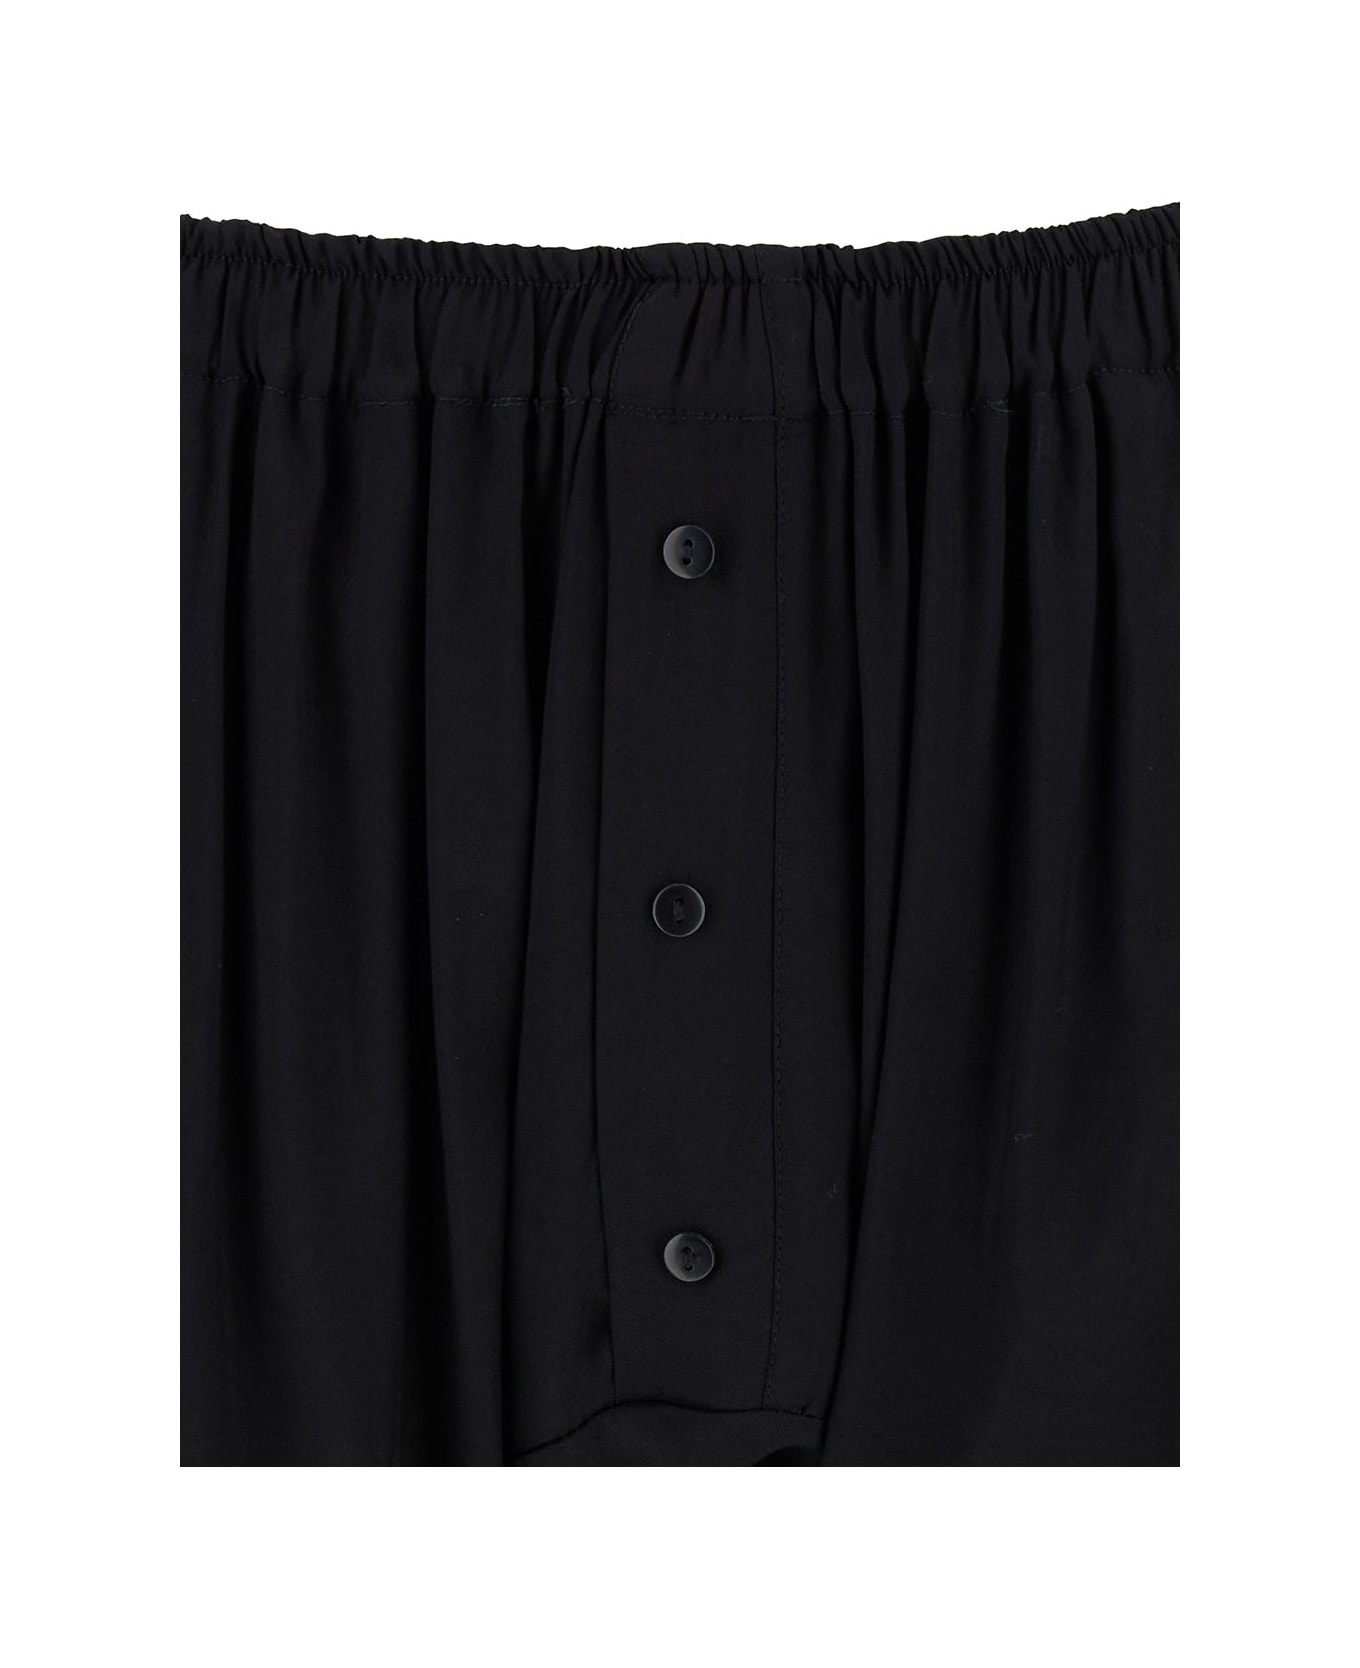 Federica Tosi Black Bermuda Shorts With Buttons In Viscose Woman - Black